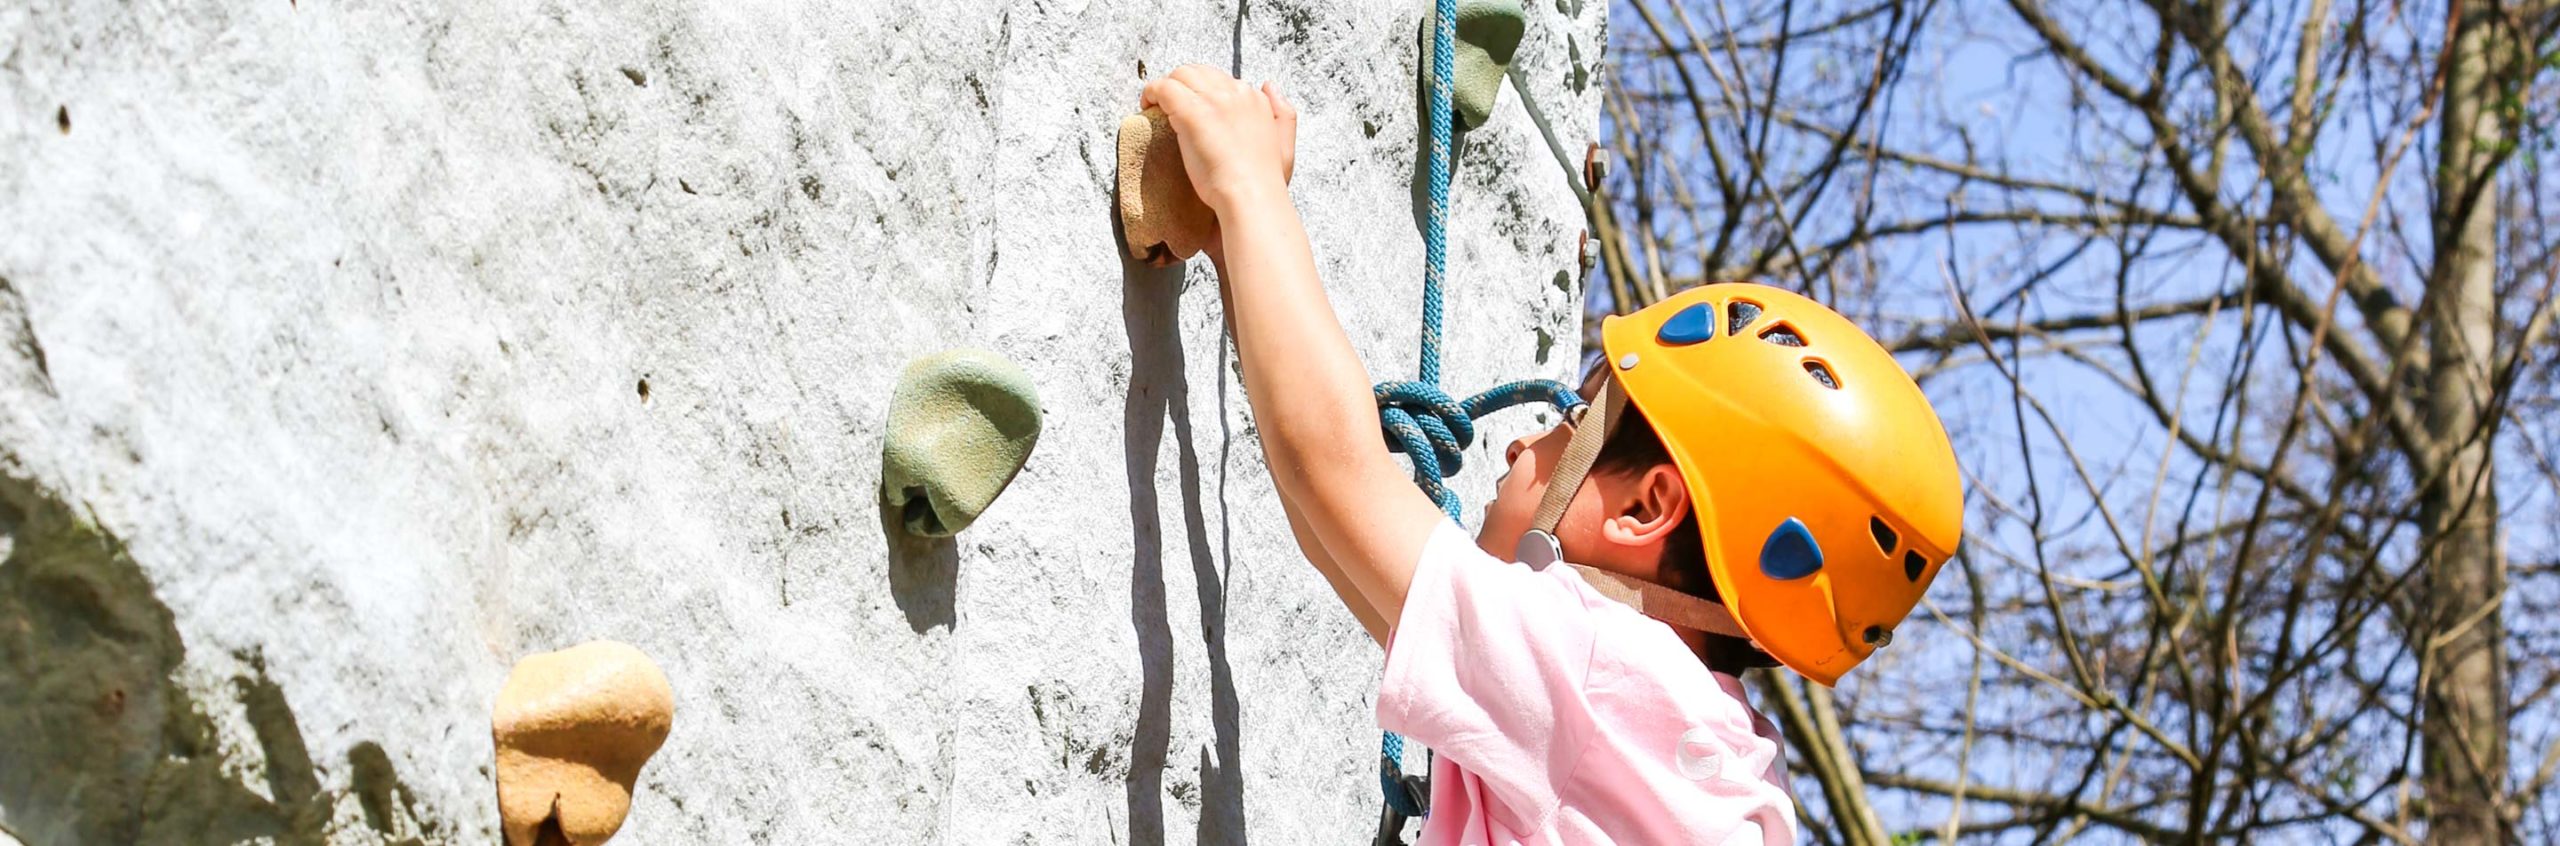 Boy with a helmet climbing a rock wall outside in a harness